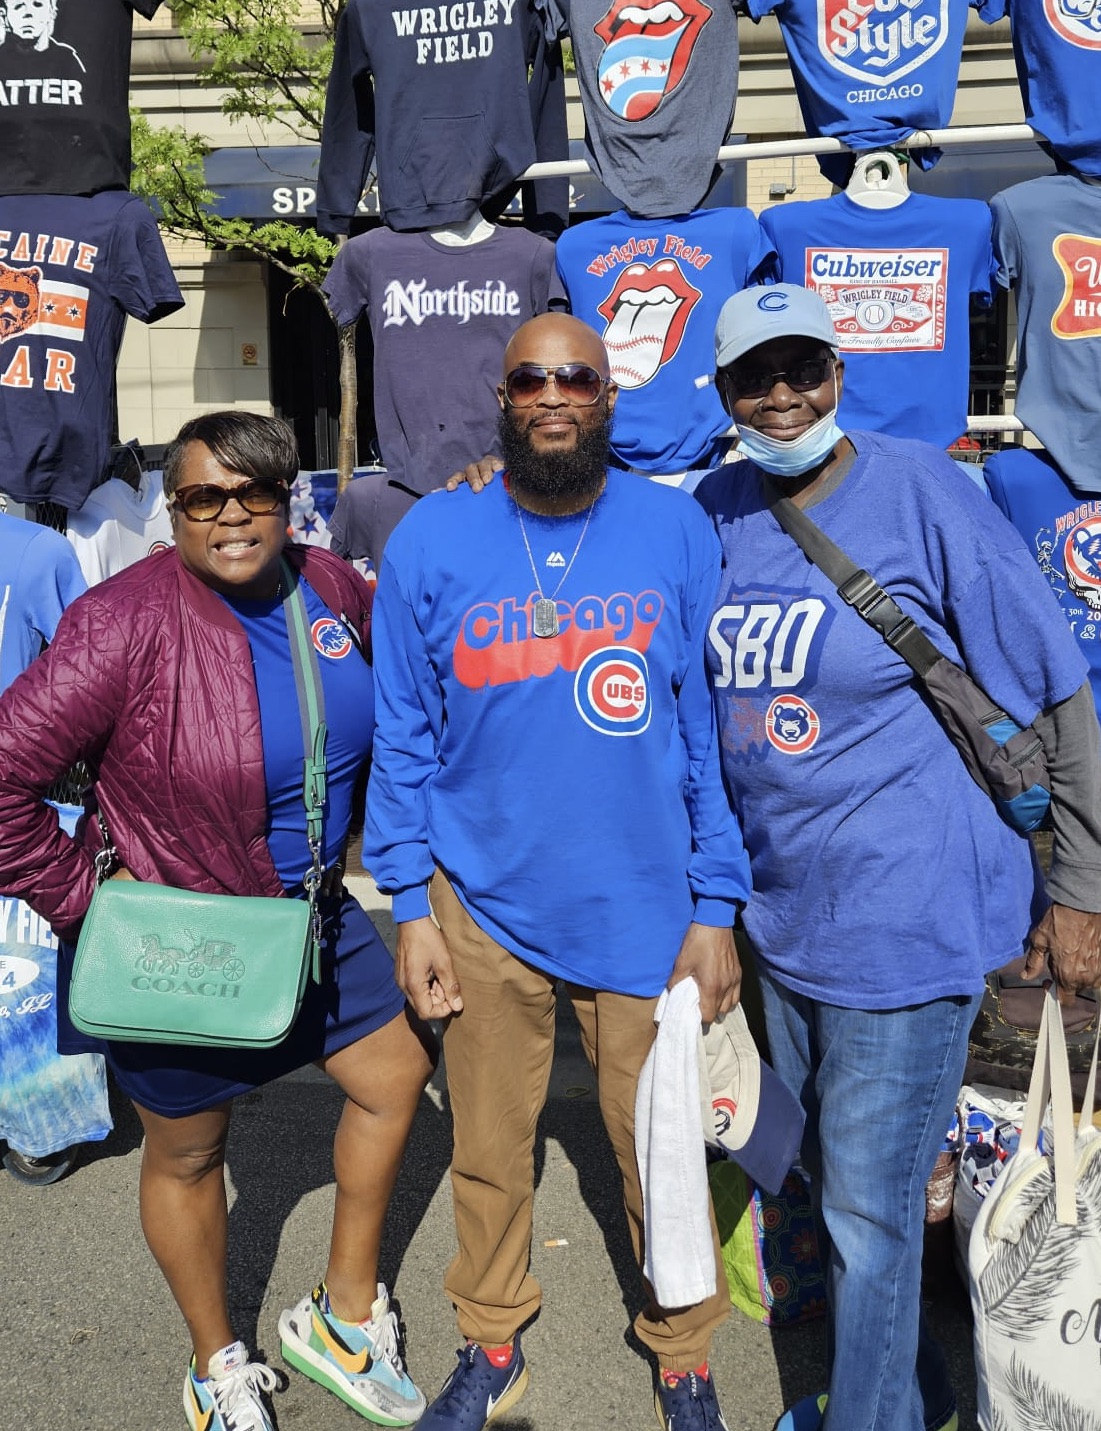 Elsworth Smith and family enjoy a Chicago Cubs outing